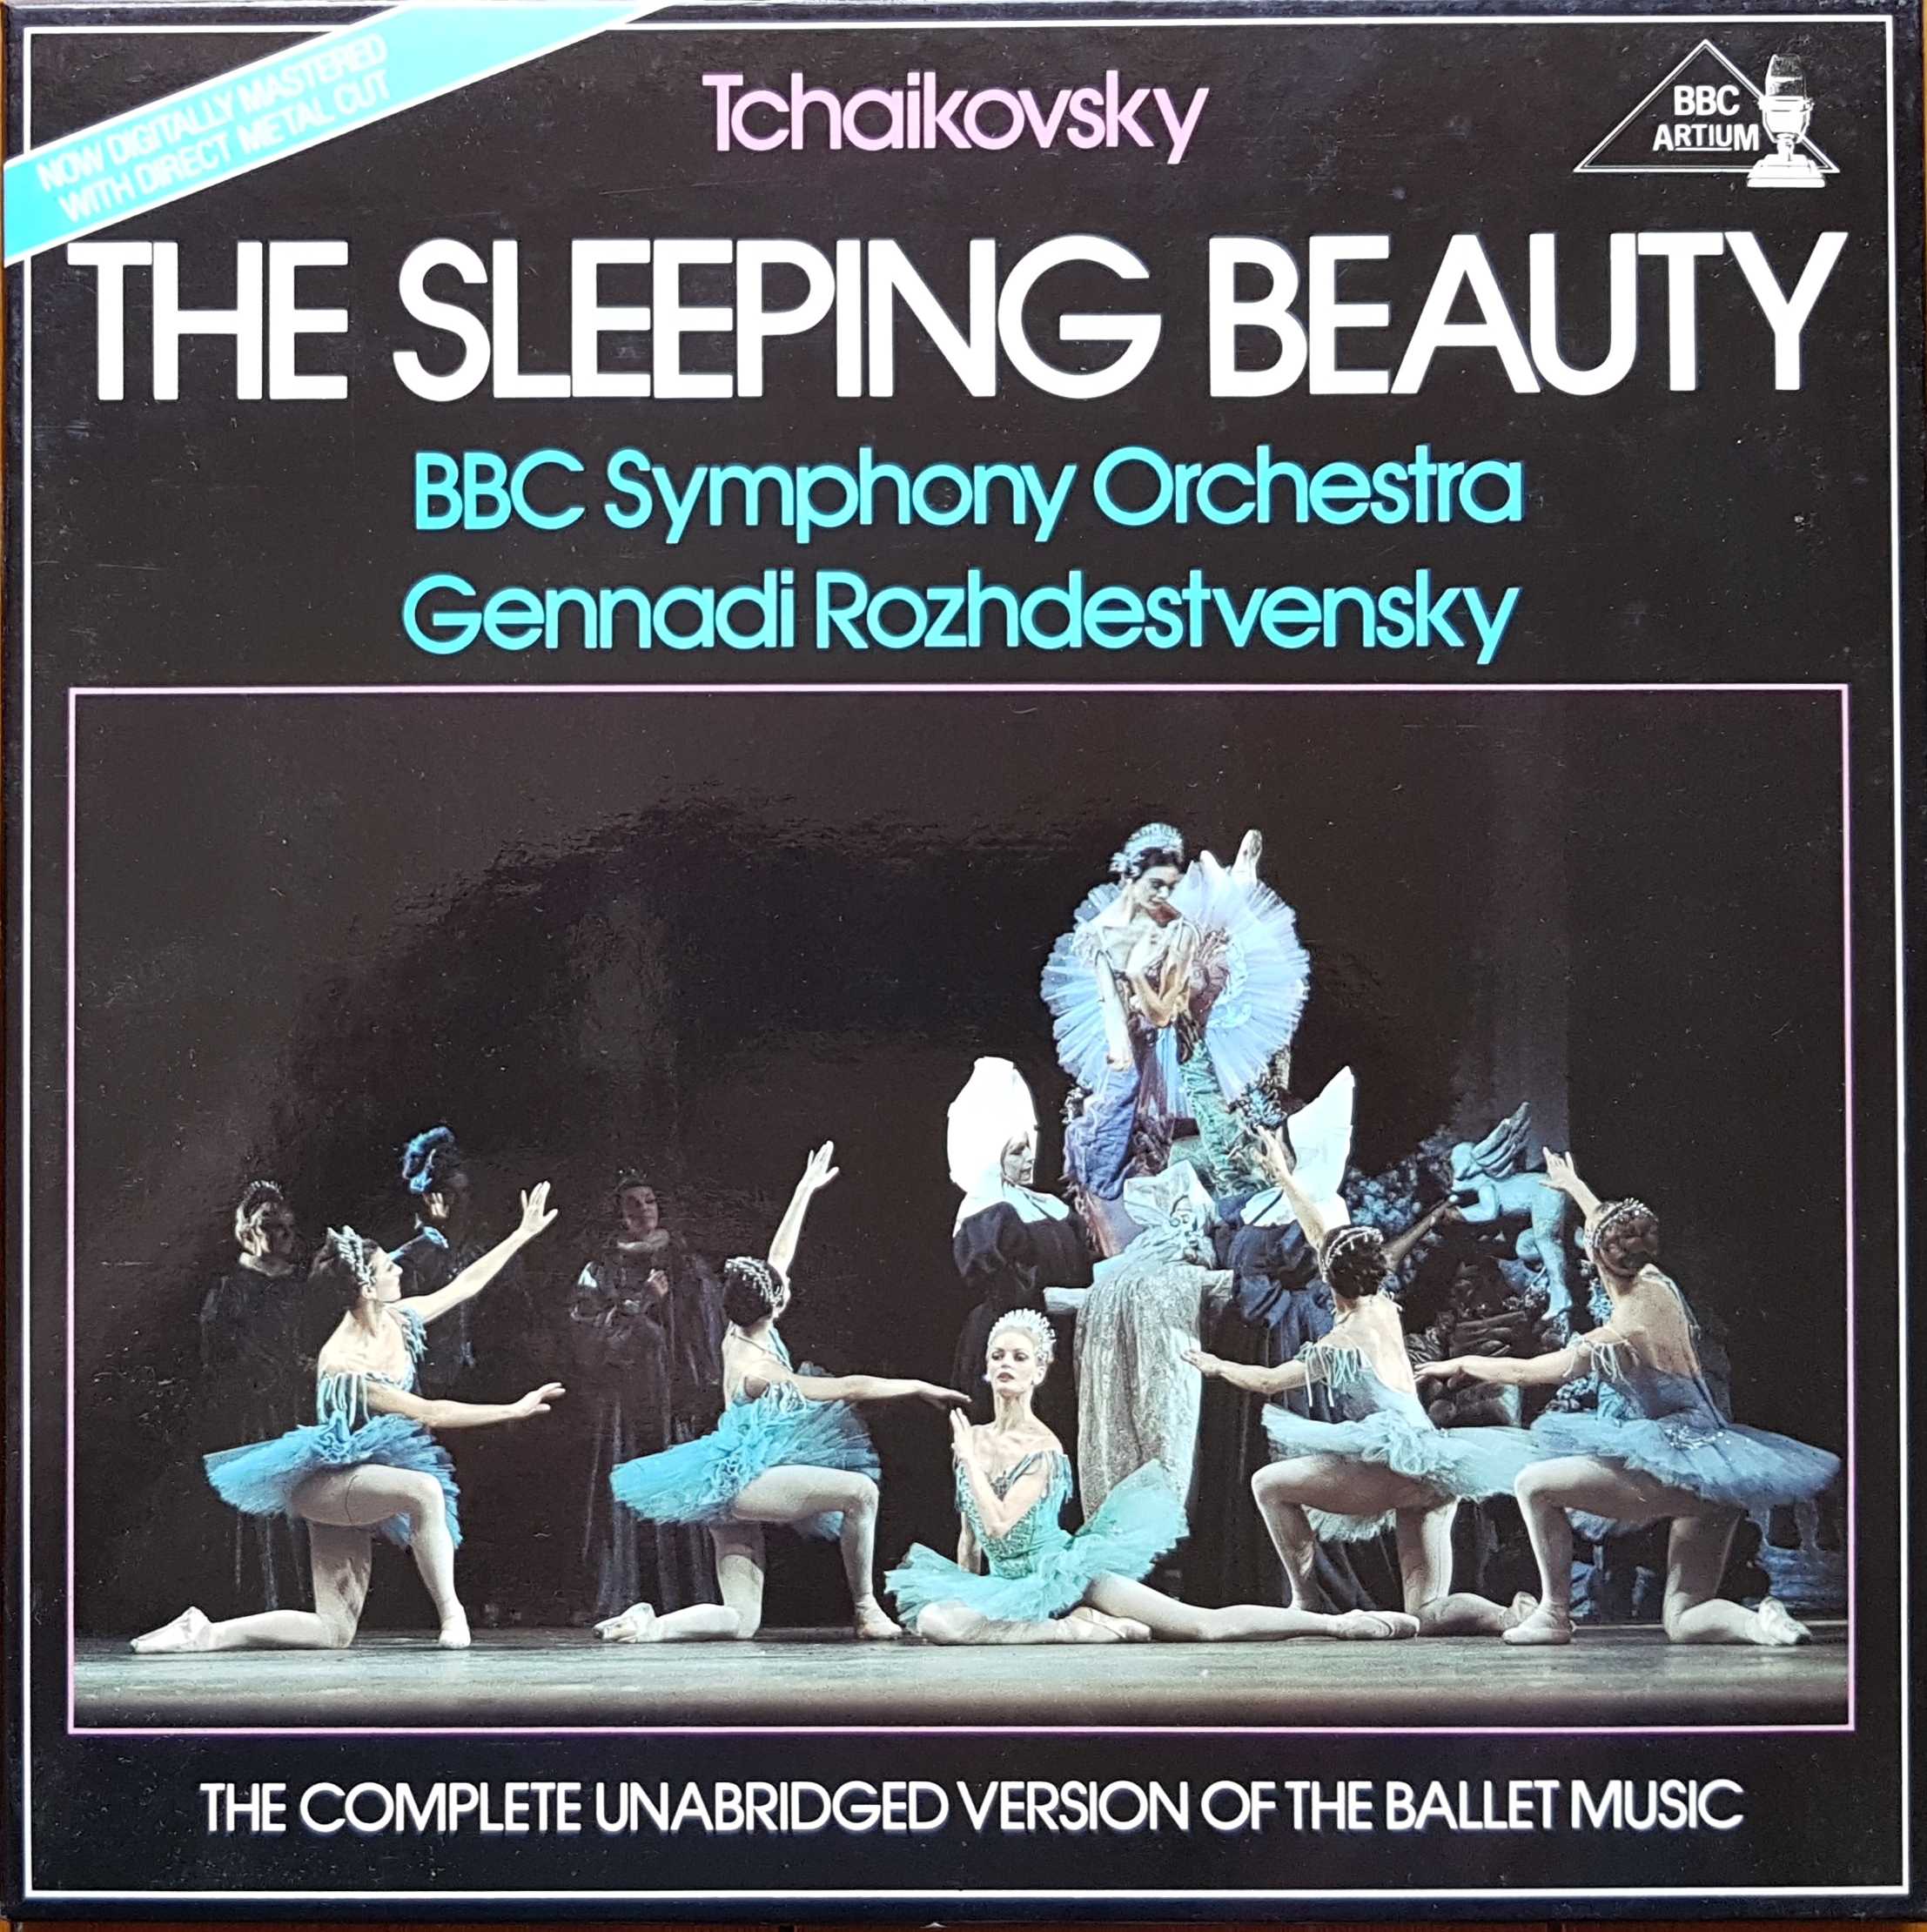 Picture of The sleeping beauty by artist Tchaikovsky from the BBC albums - Records and Tapes library